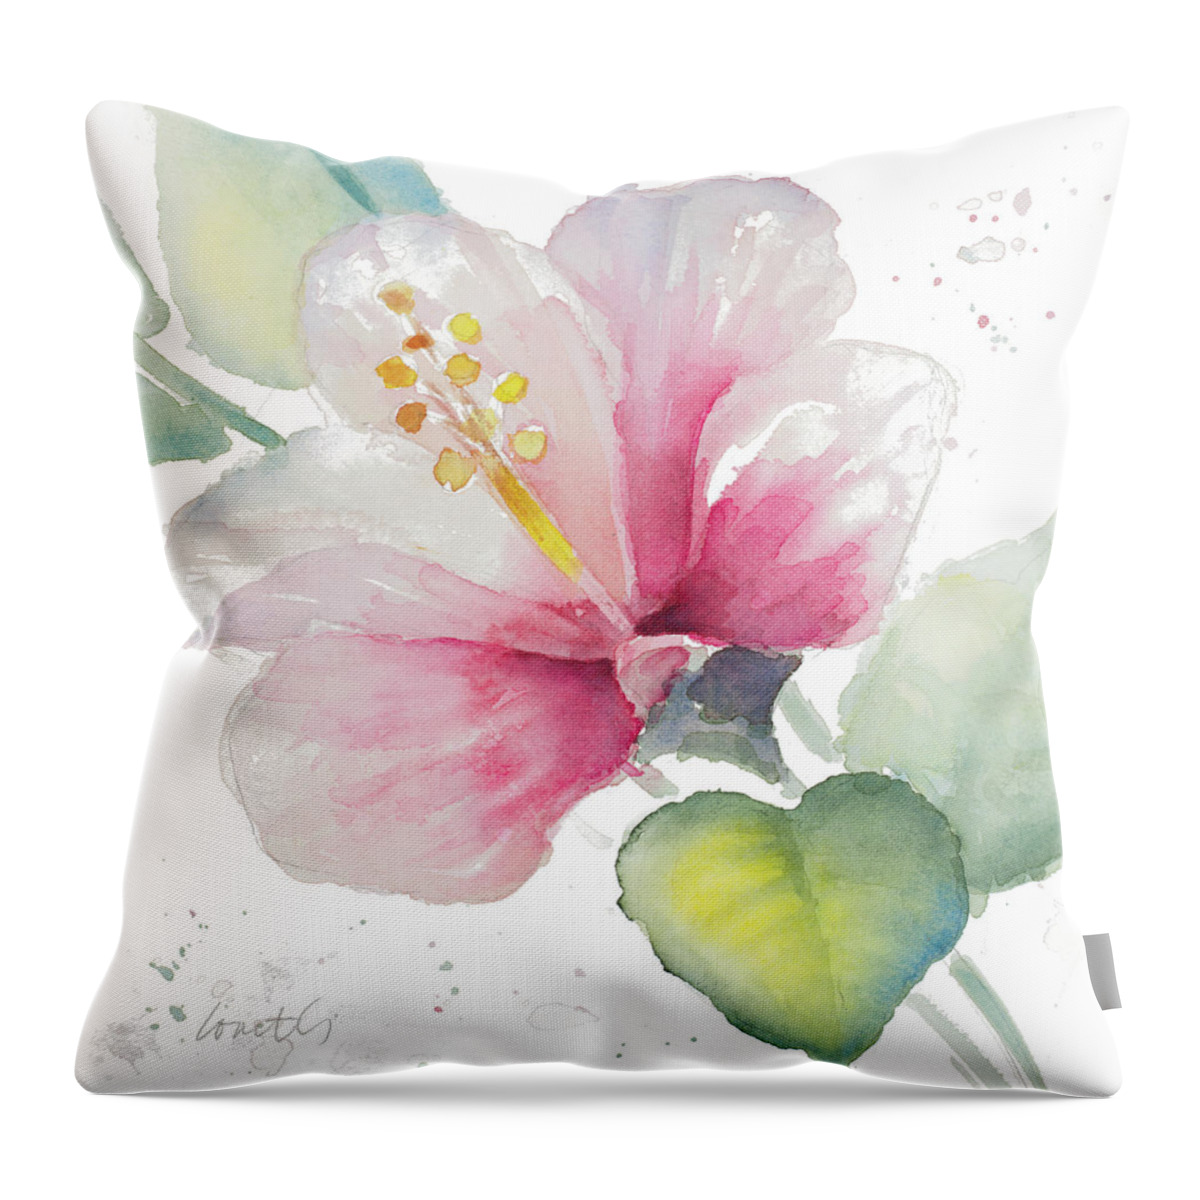 Fragrant Throw Pillow featuring the painting Fragrant Hibiscus II by Lanie Loreth